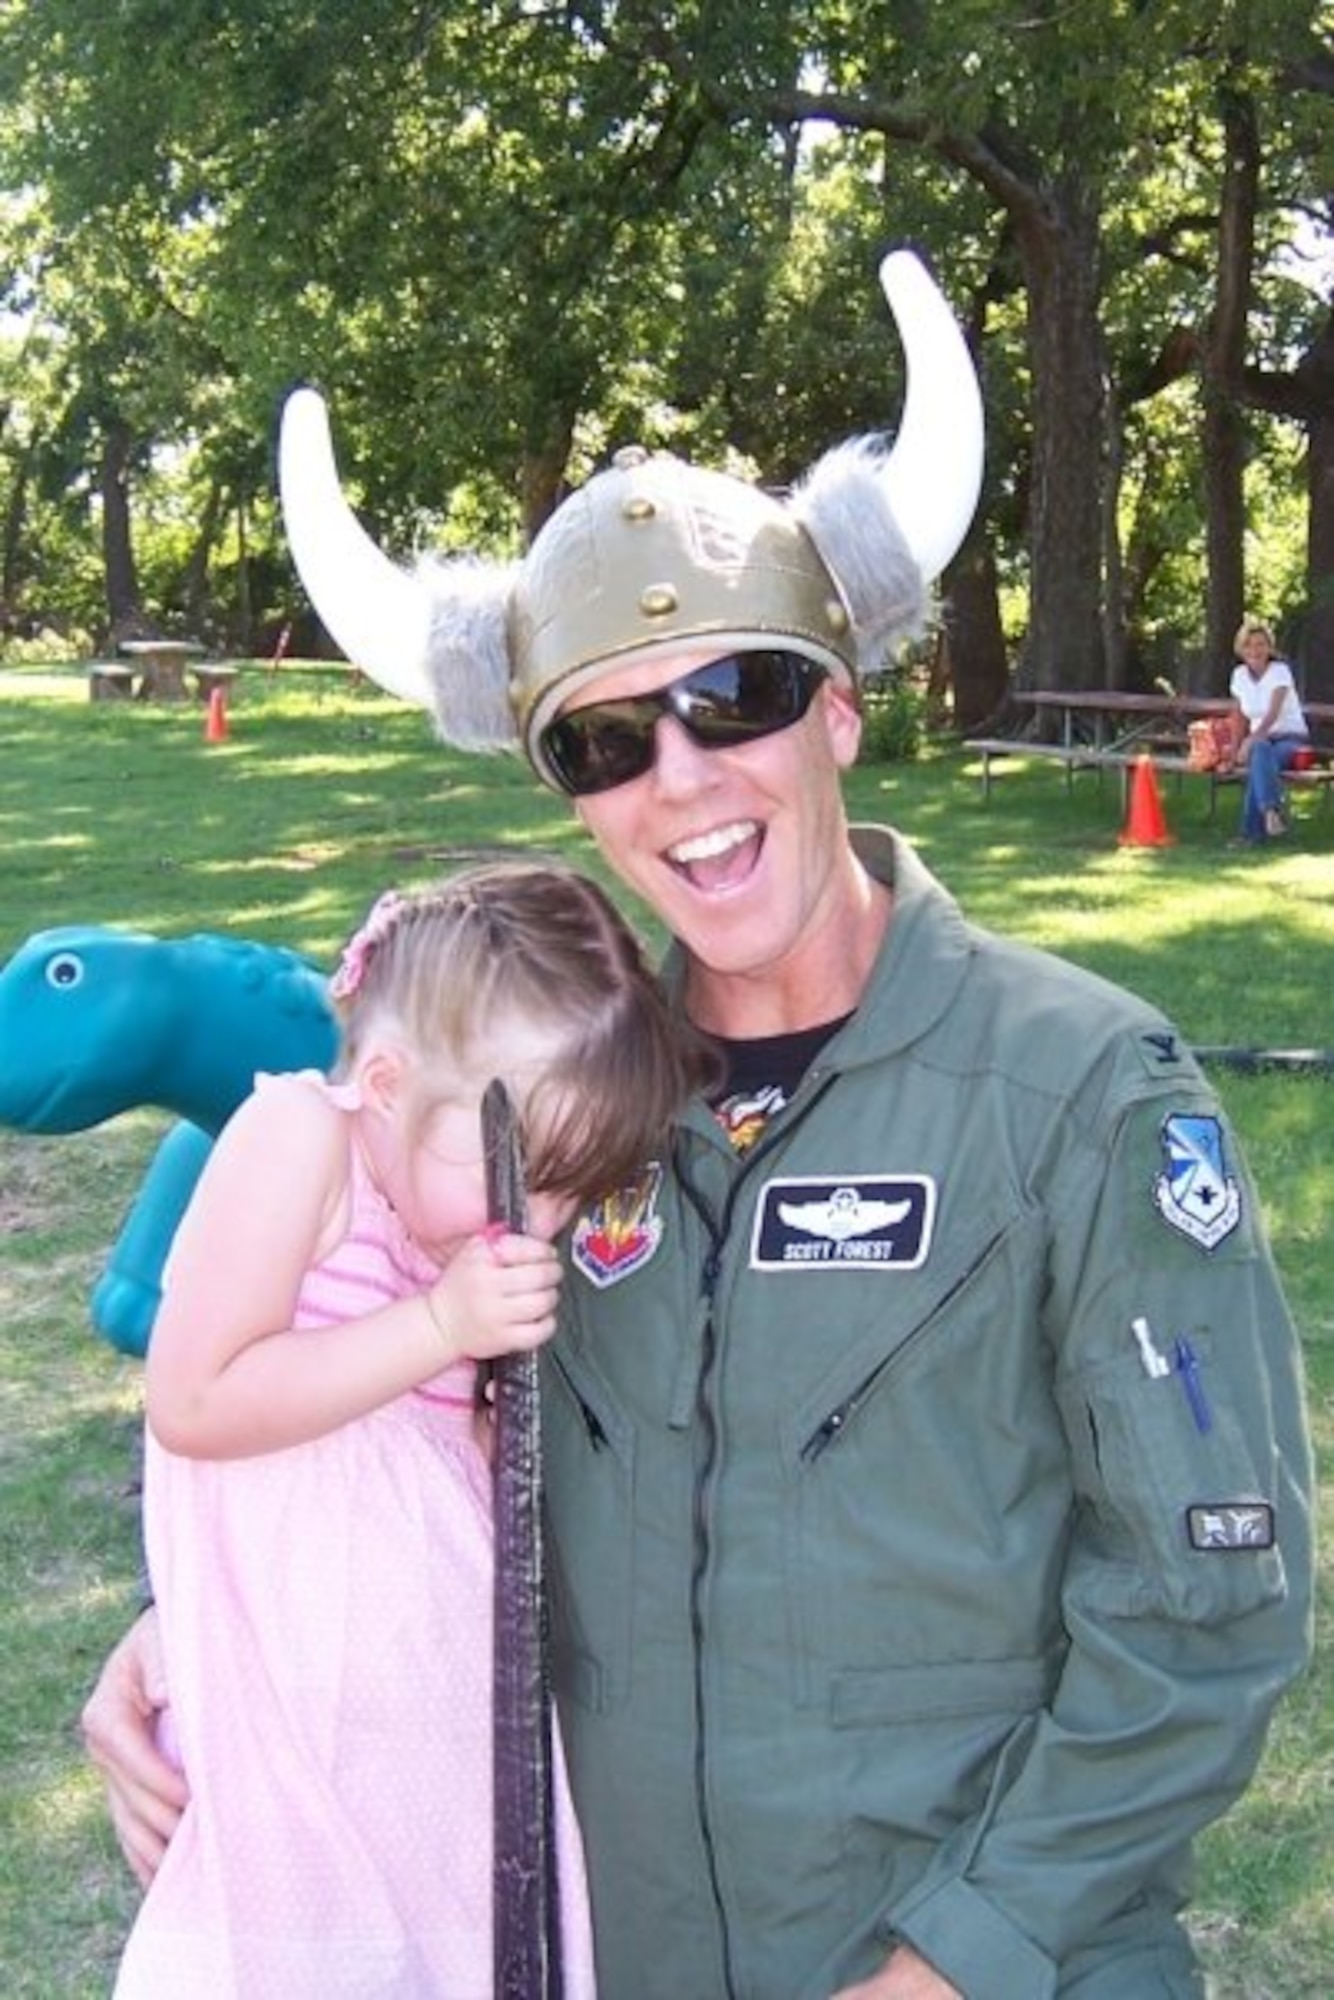 Col. Scott Forest, vice commander, 552 ACW, shows his Viking spirit with his daughter, although she is not quite as excited about the photo op! Photo compliments of 1st Lt. Michelle Zook.